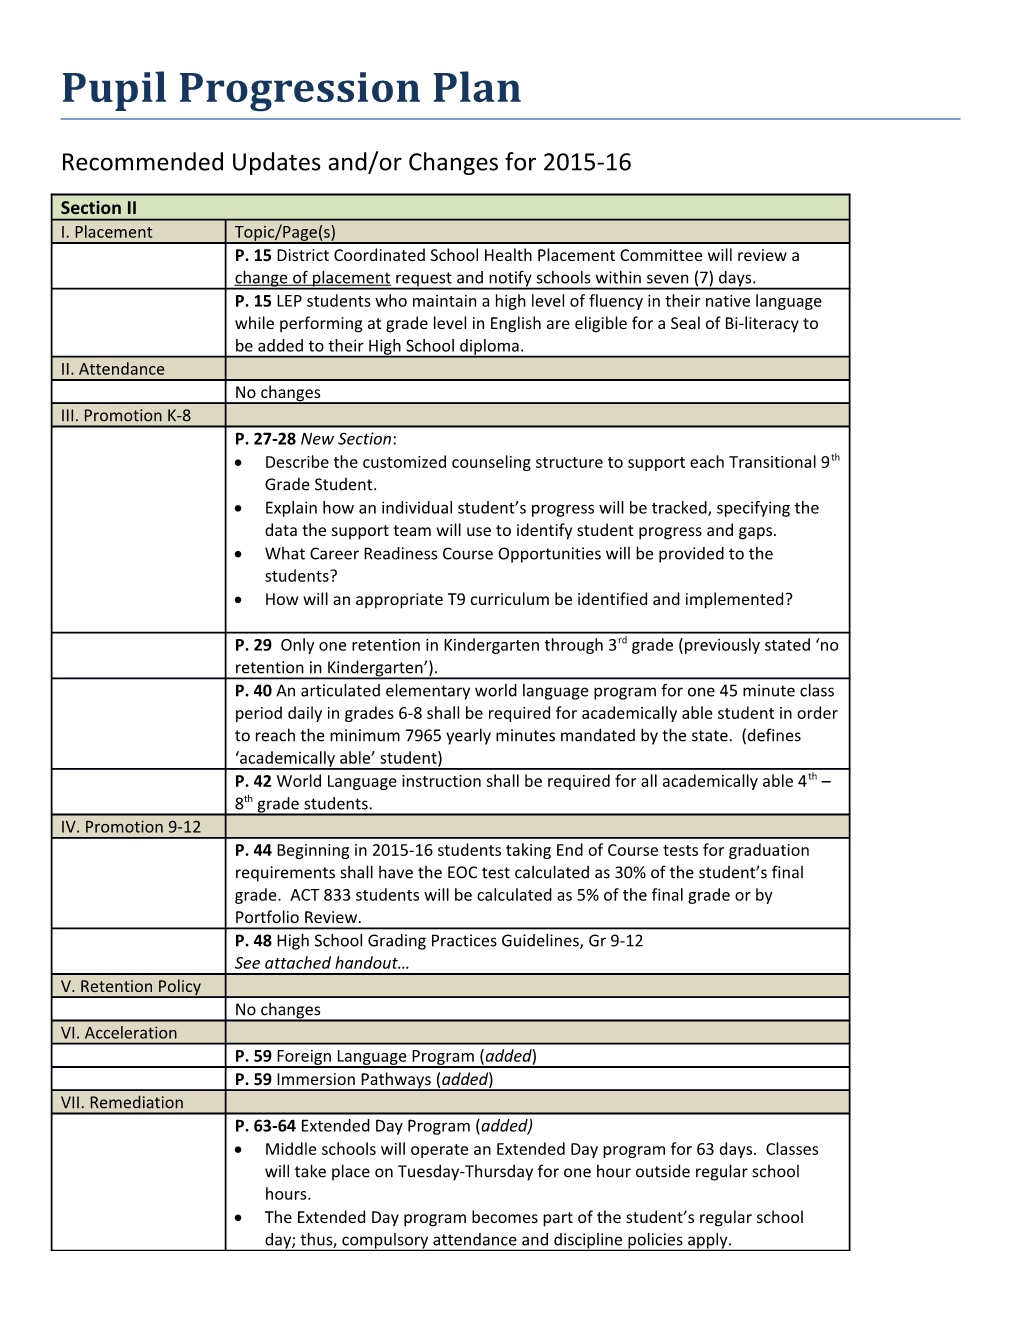 Recommended Updates And/Or Changes for 2015-16